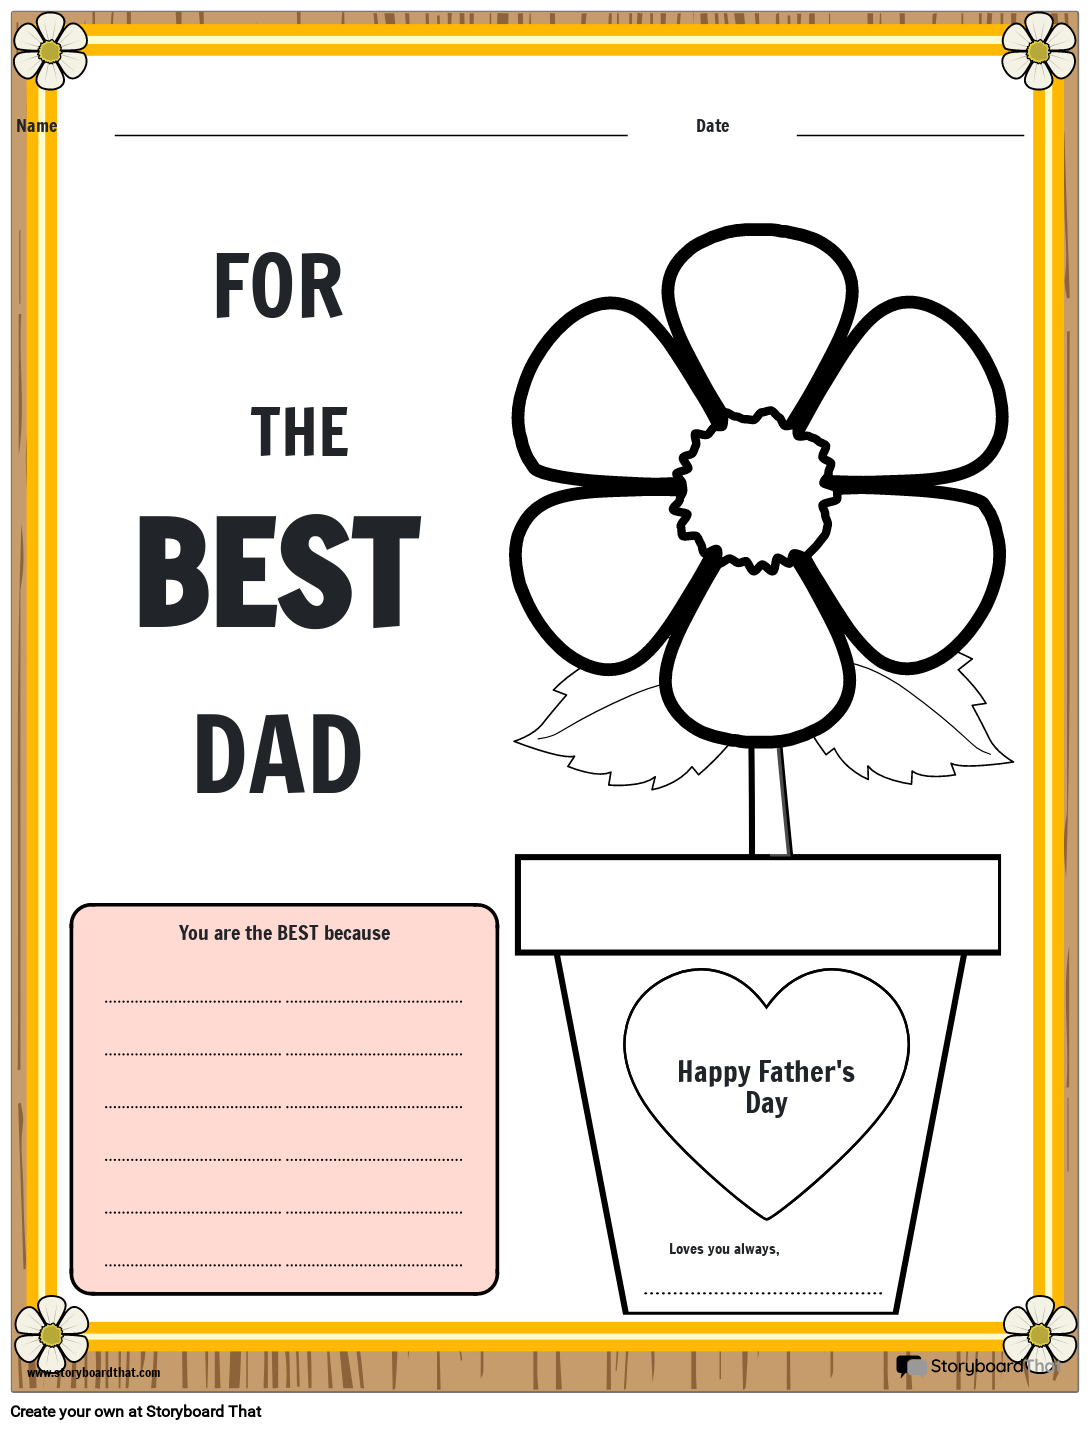 Flower for Dad: Cute Idea for Last Minute Father's Day Gift